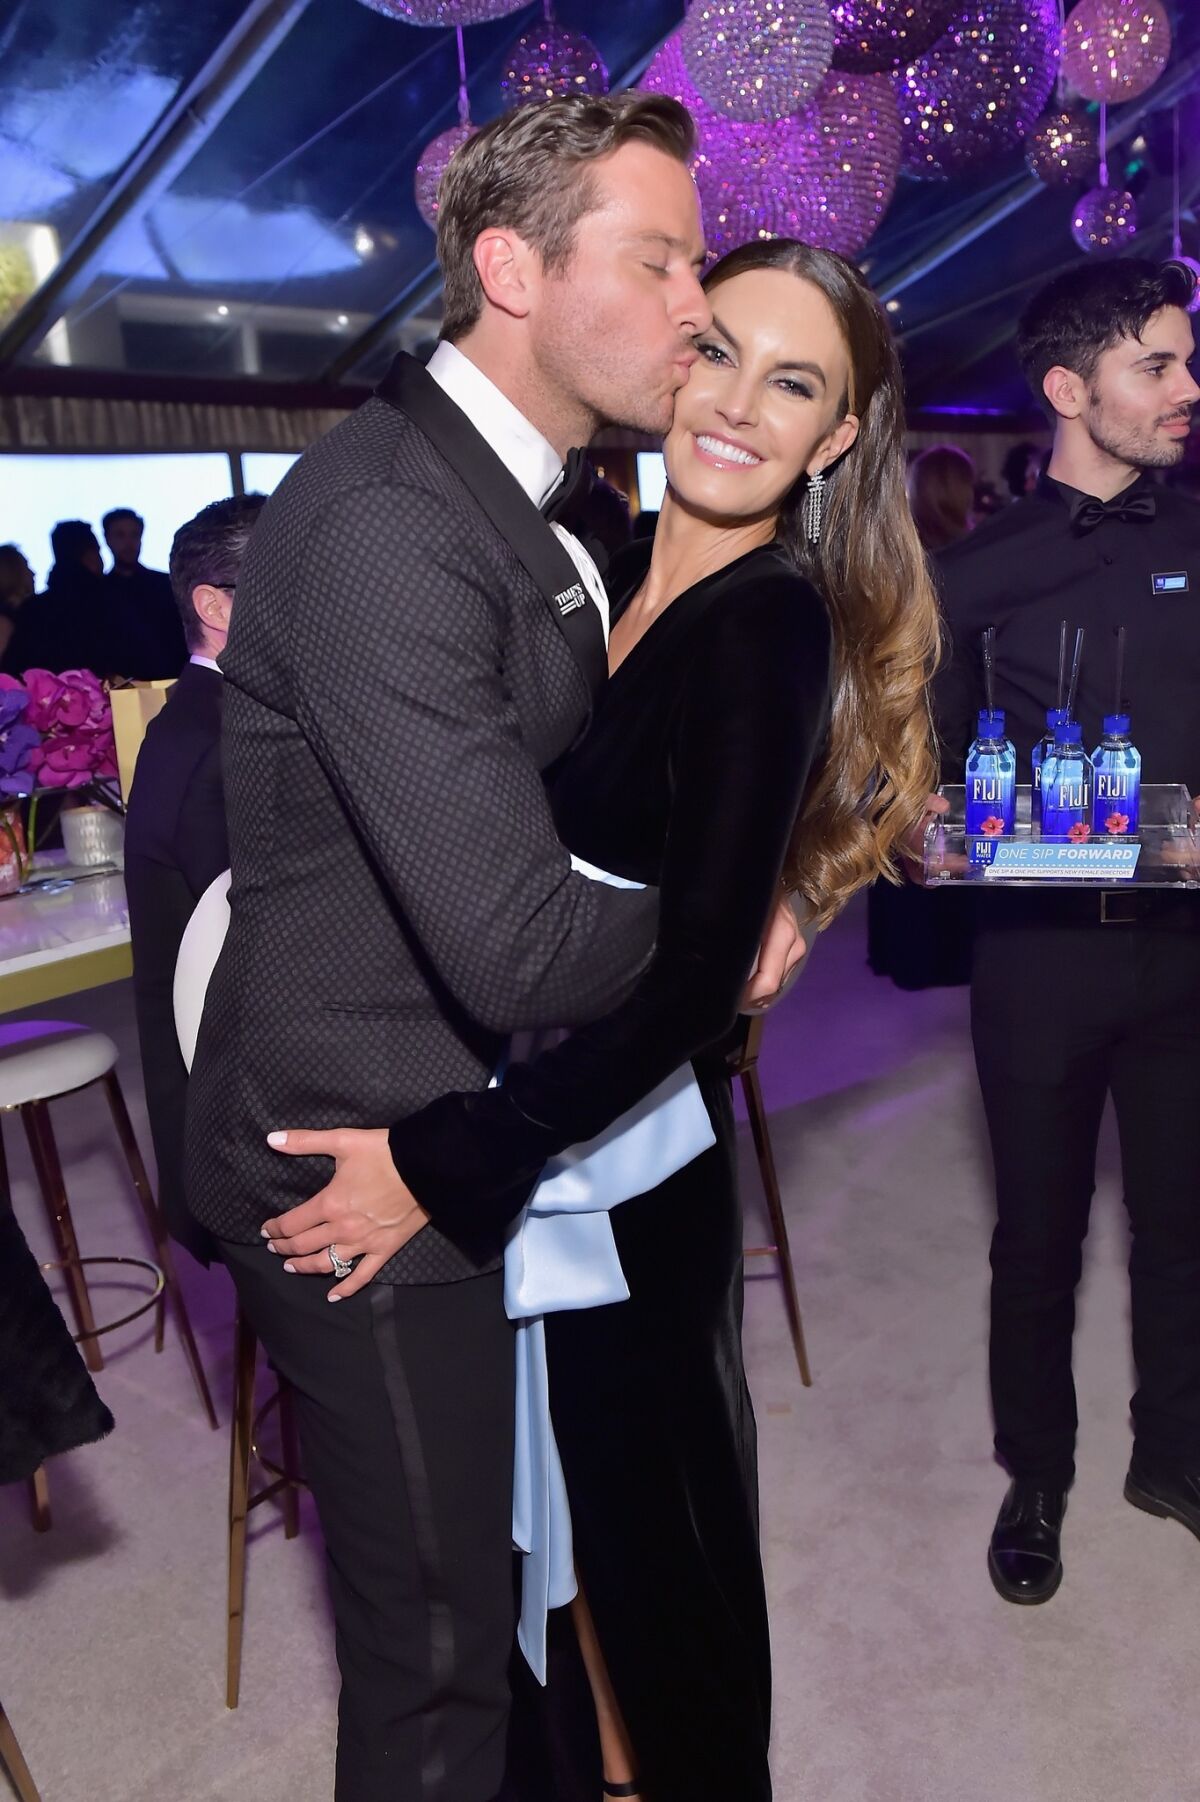 Armie Hammer, left, and Elizabeth Chambers share a moment at the HFPA's viewing and after-party at the Wilshire Garden inside the Beverly Hilton on Sunday.